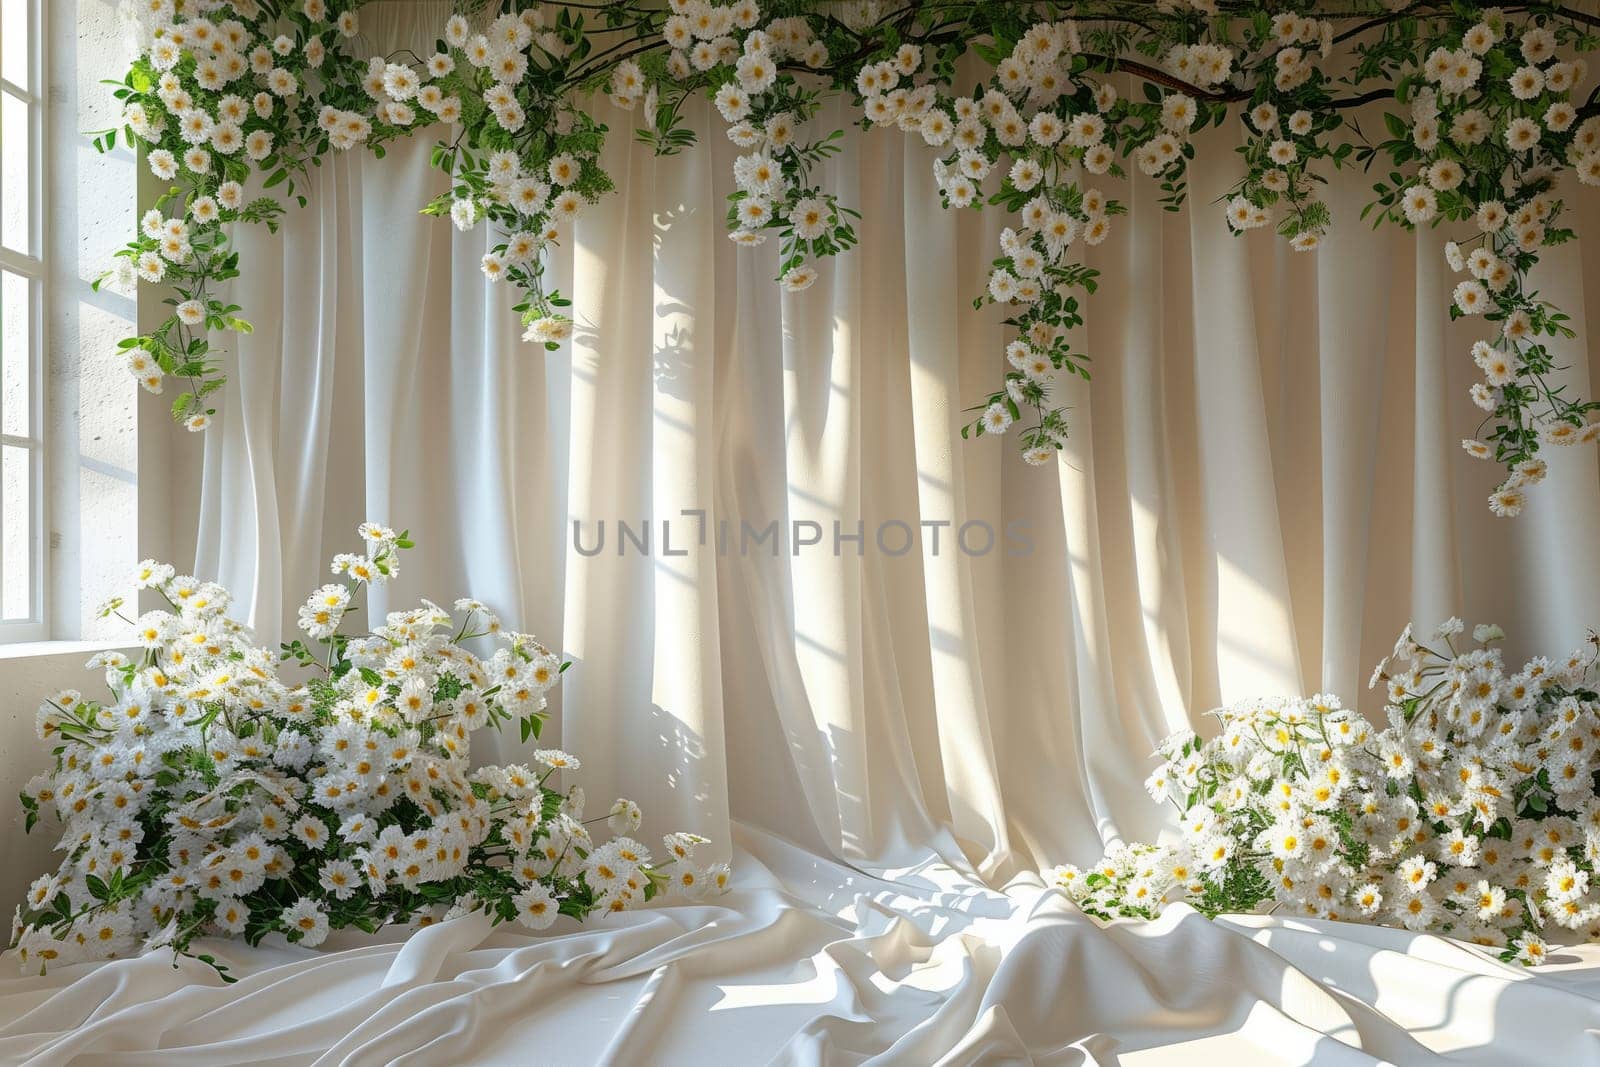 White curtains and flowers create a serene ambiance in the room by richwolf